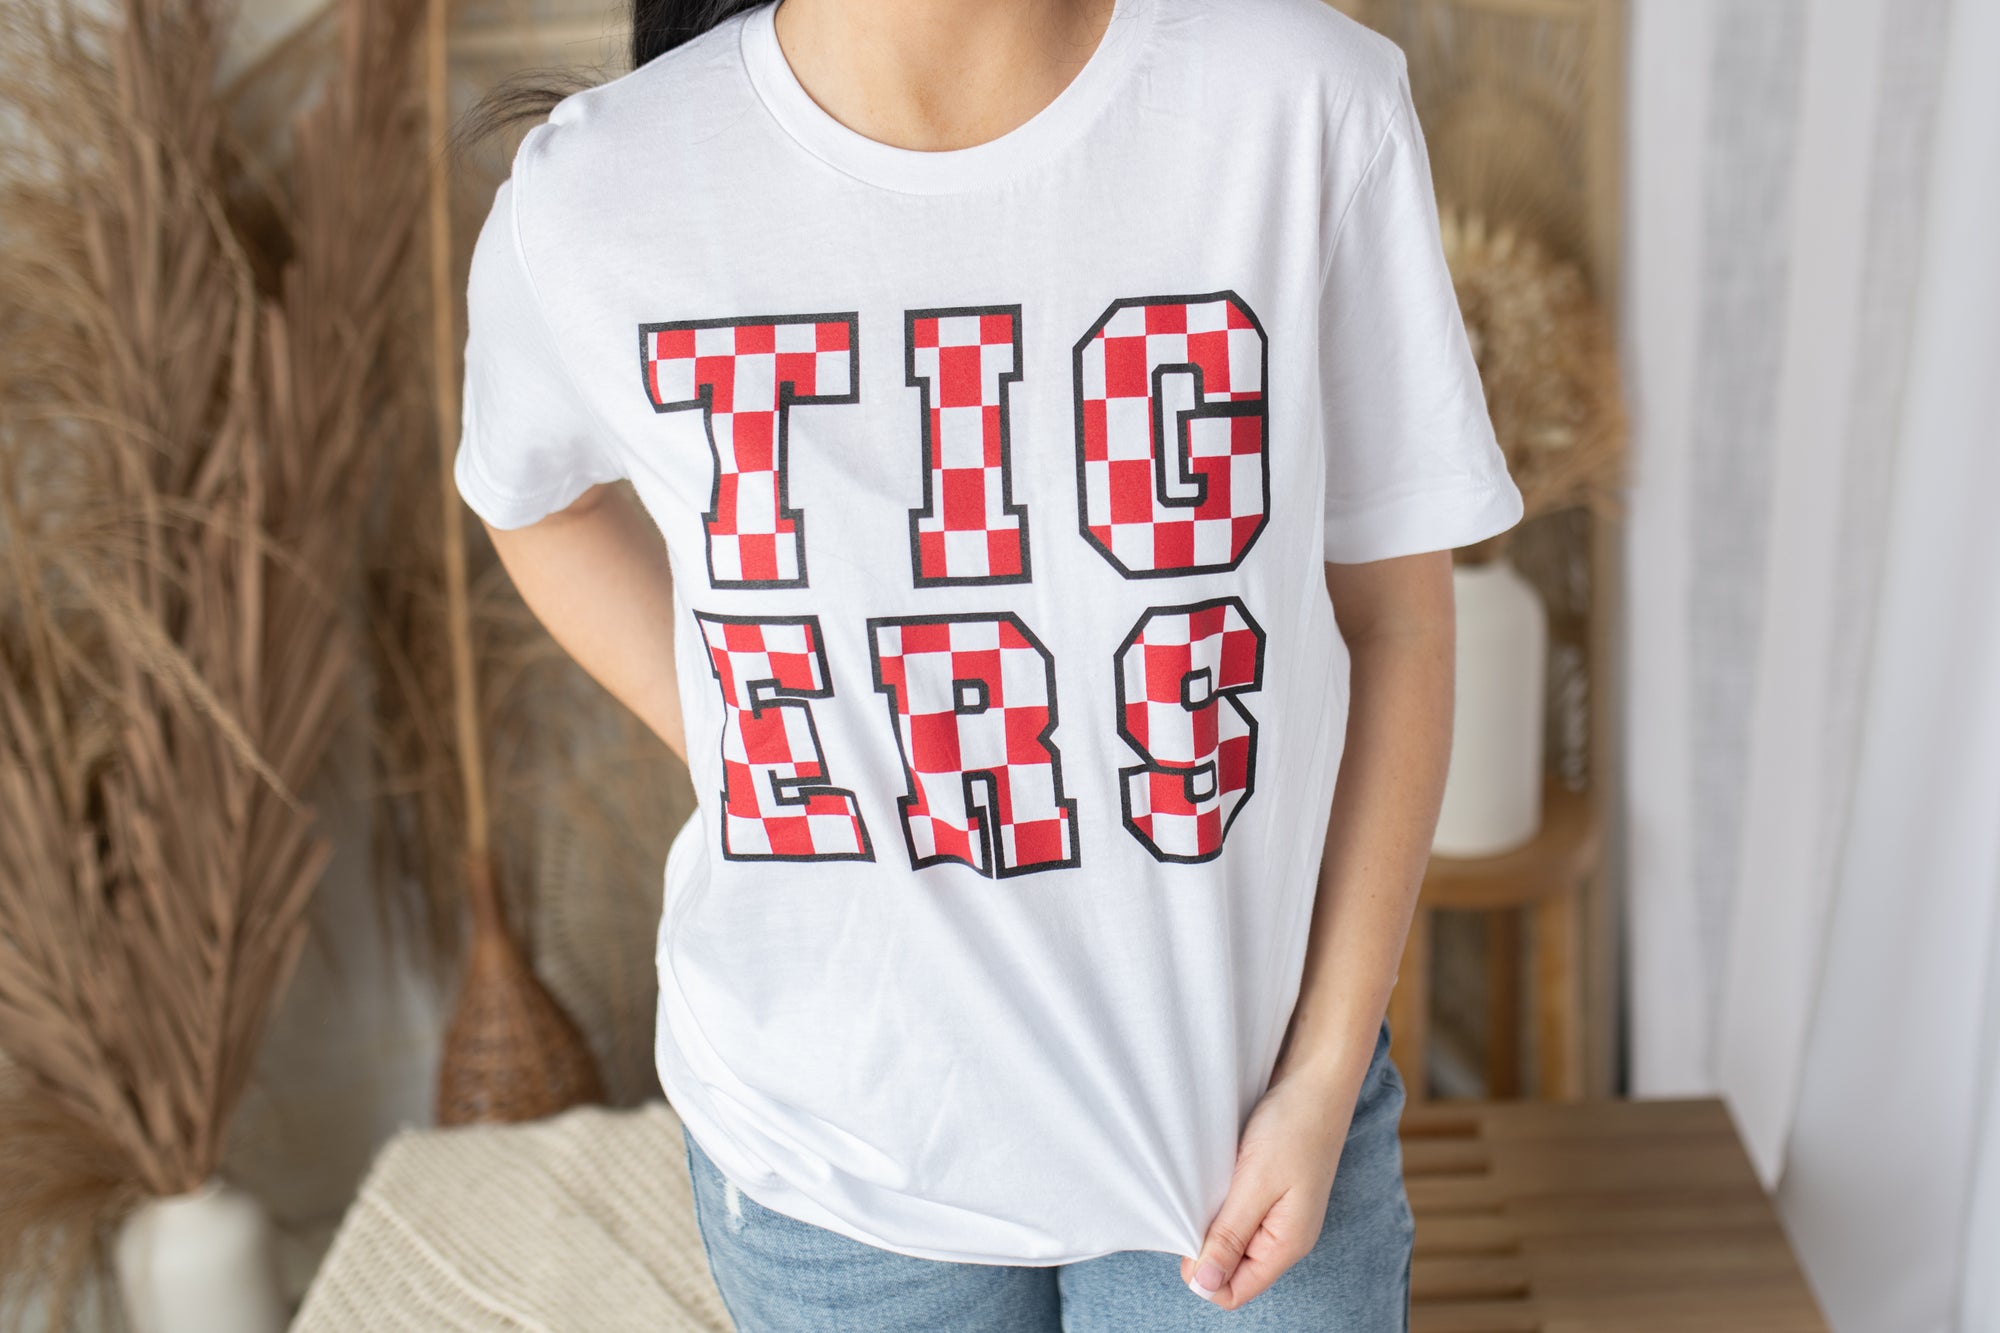 "Checkered Tigers" Red & Black Graphic Tee